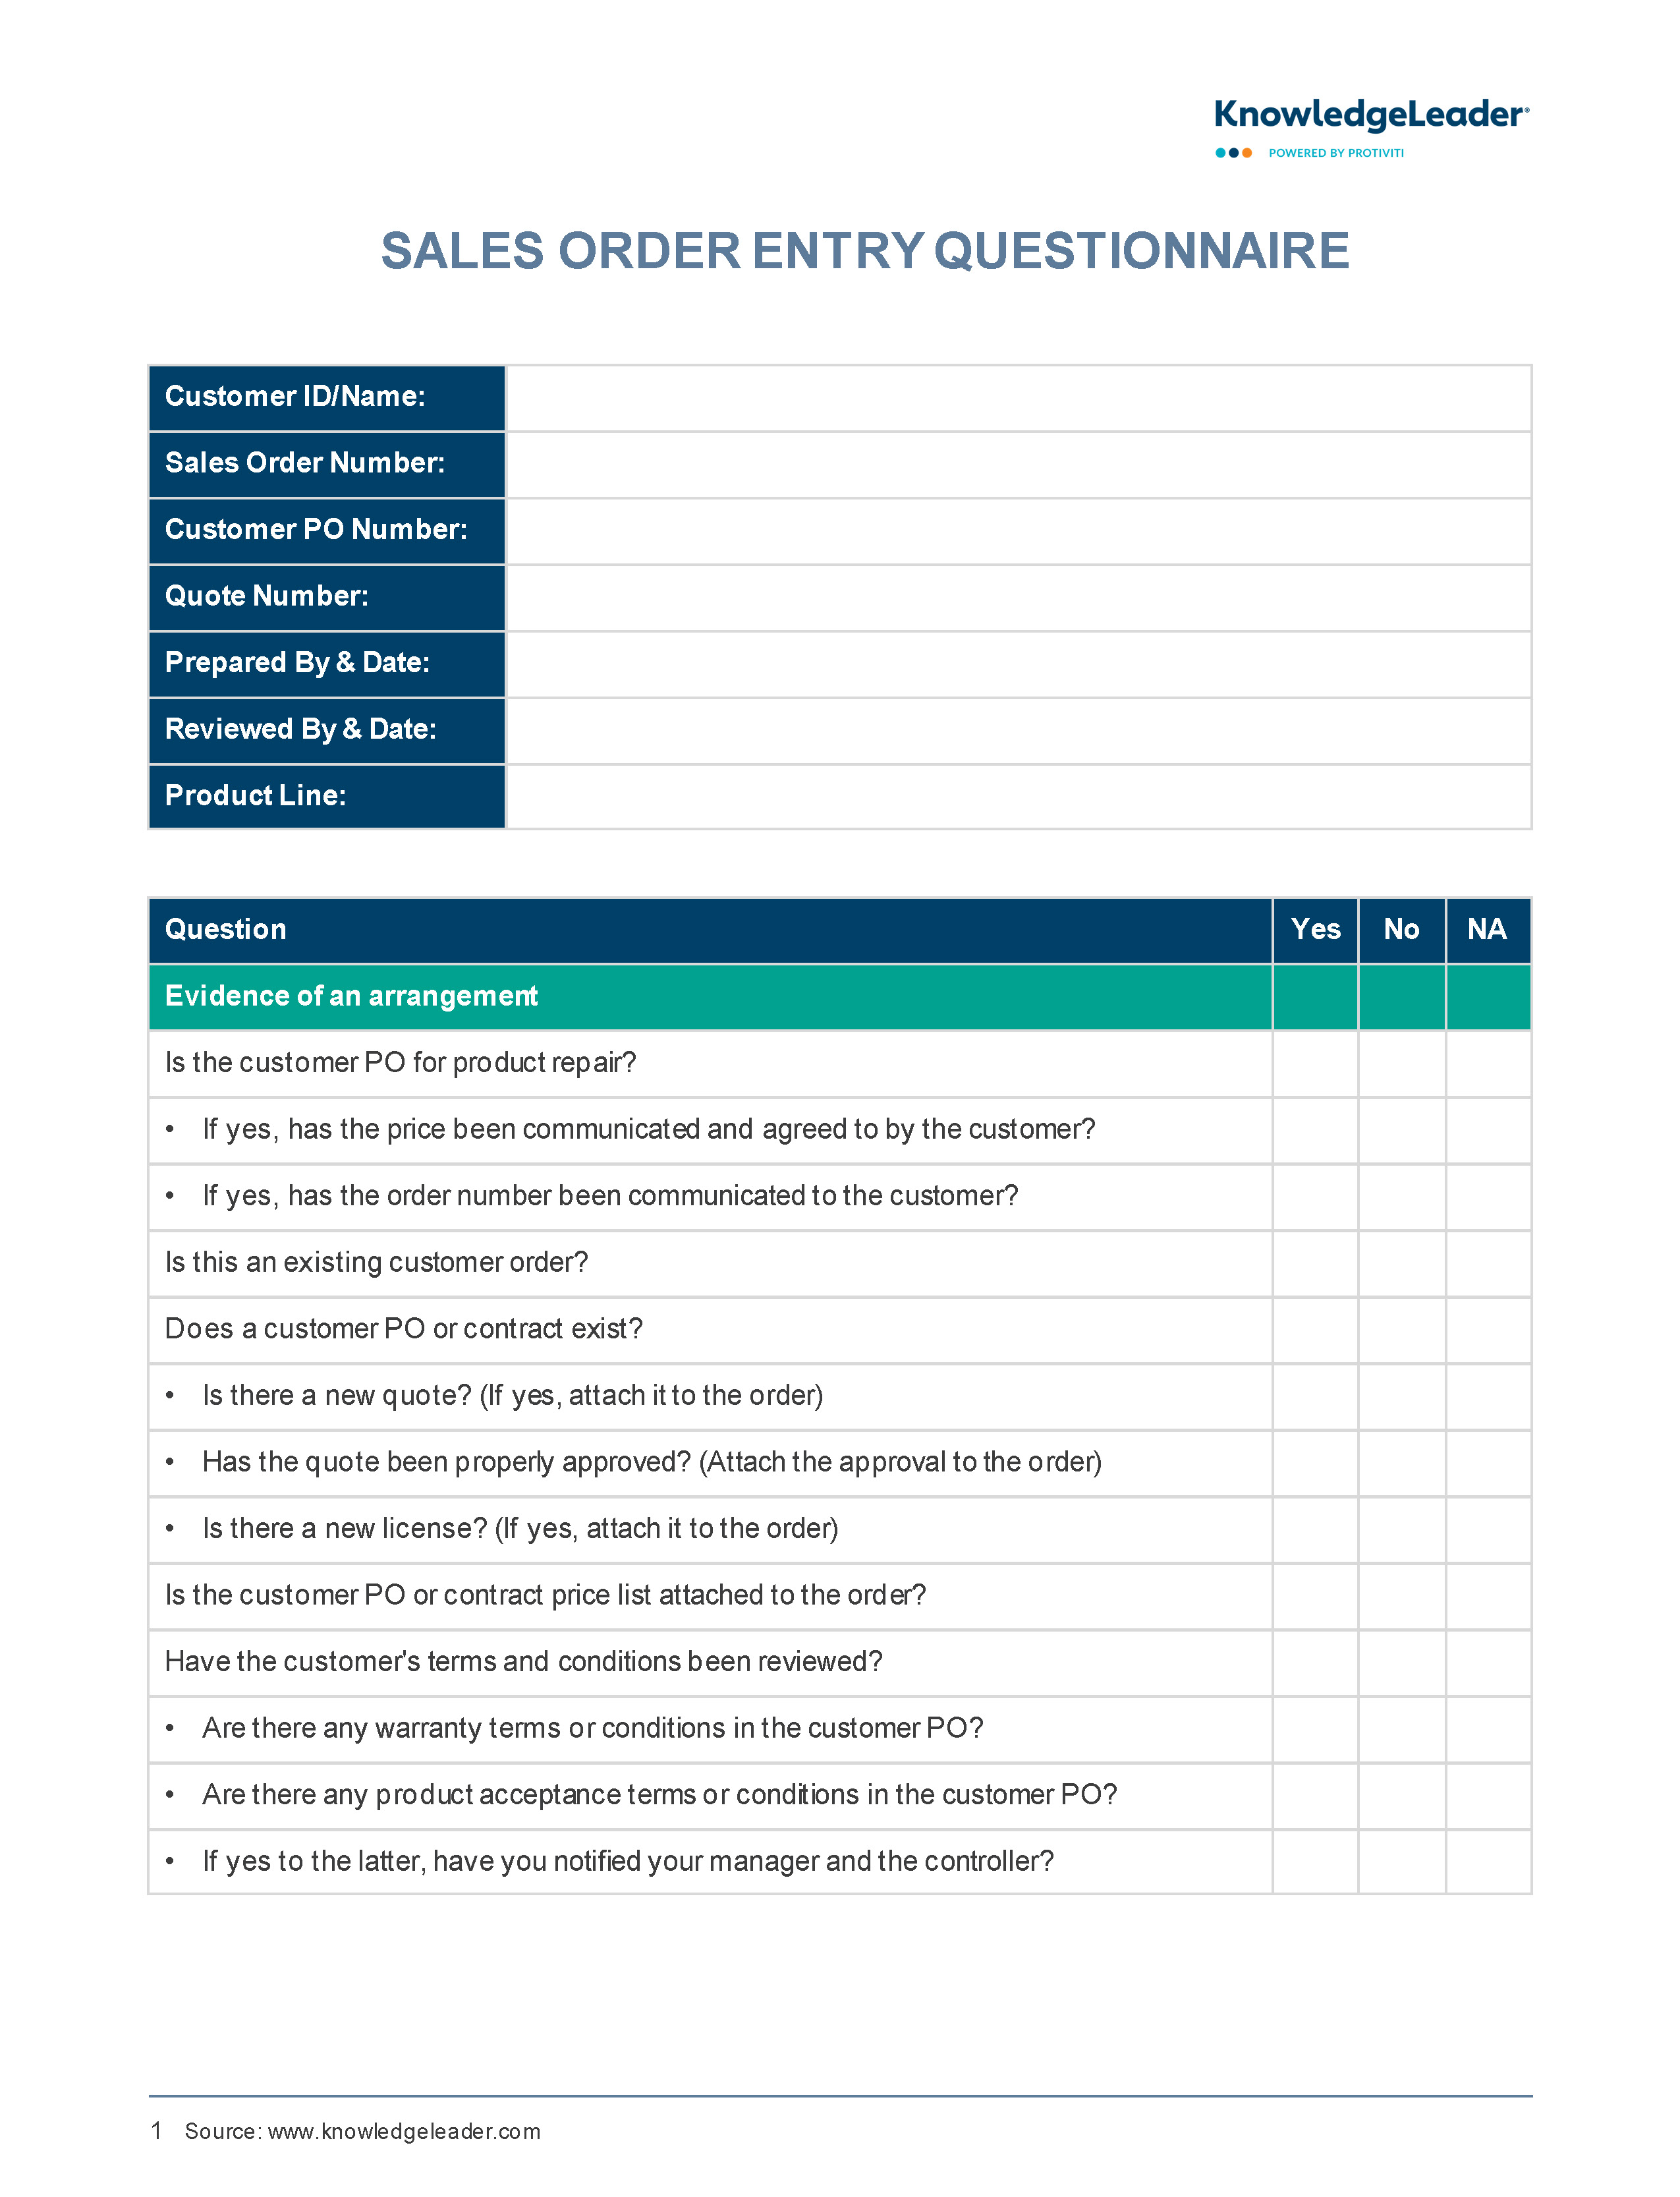 Screenshot of the first page of Sales Order Entry Questionnaire